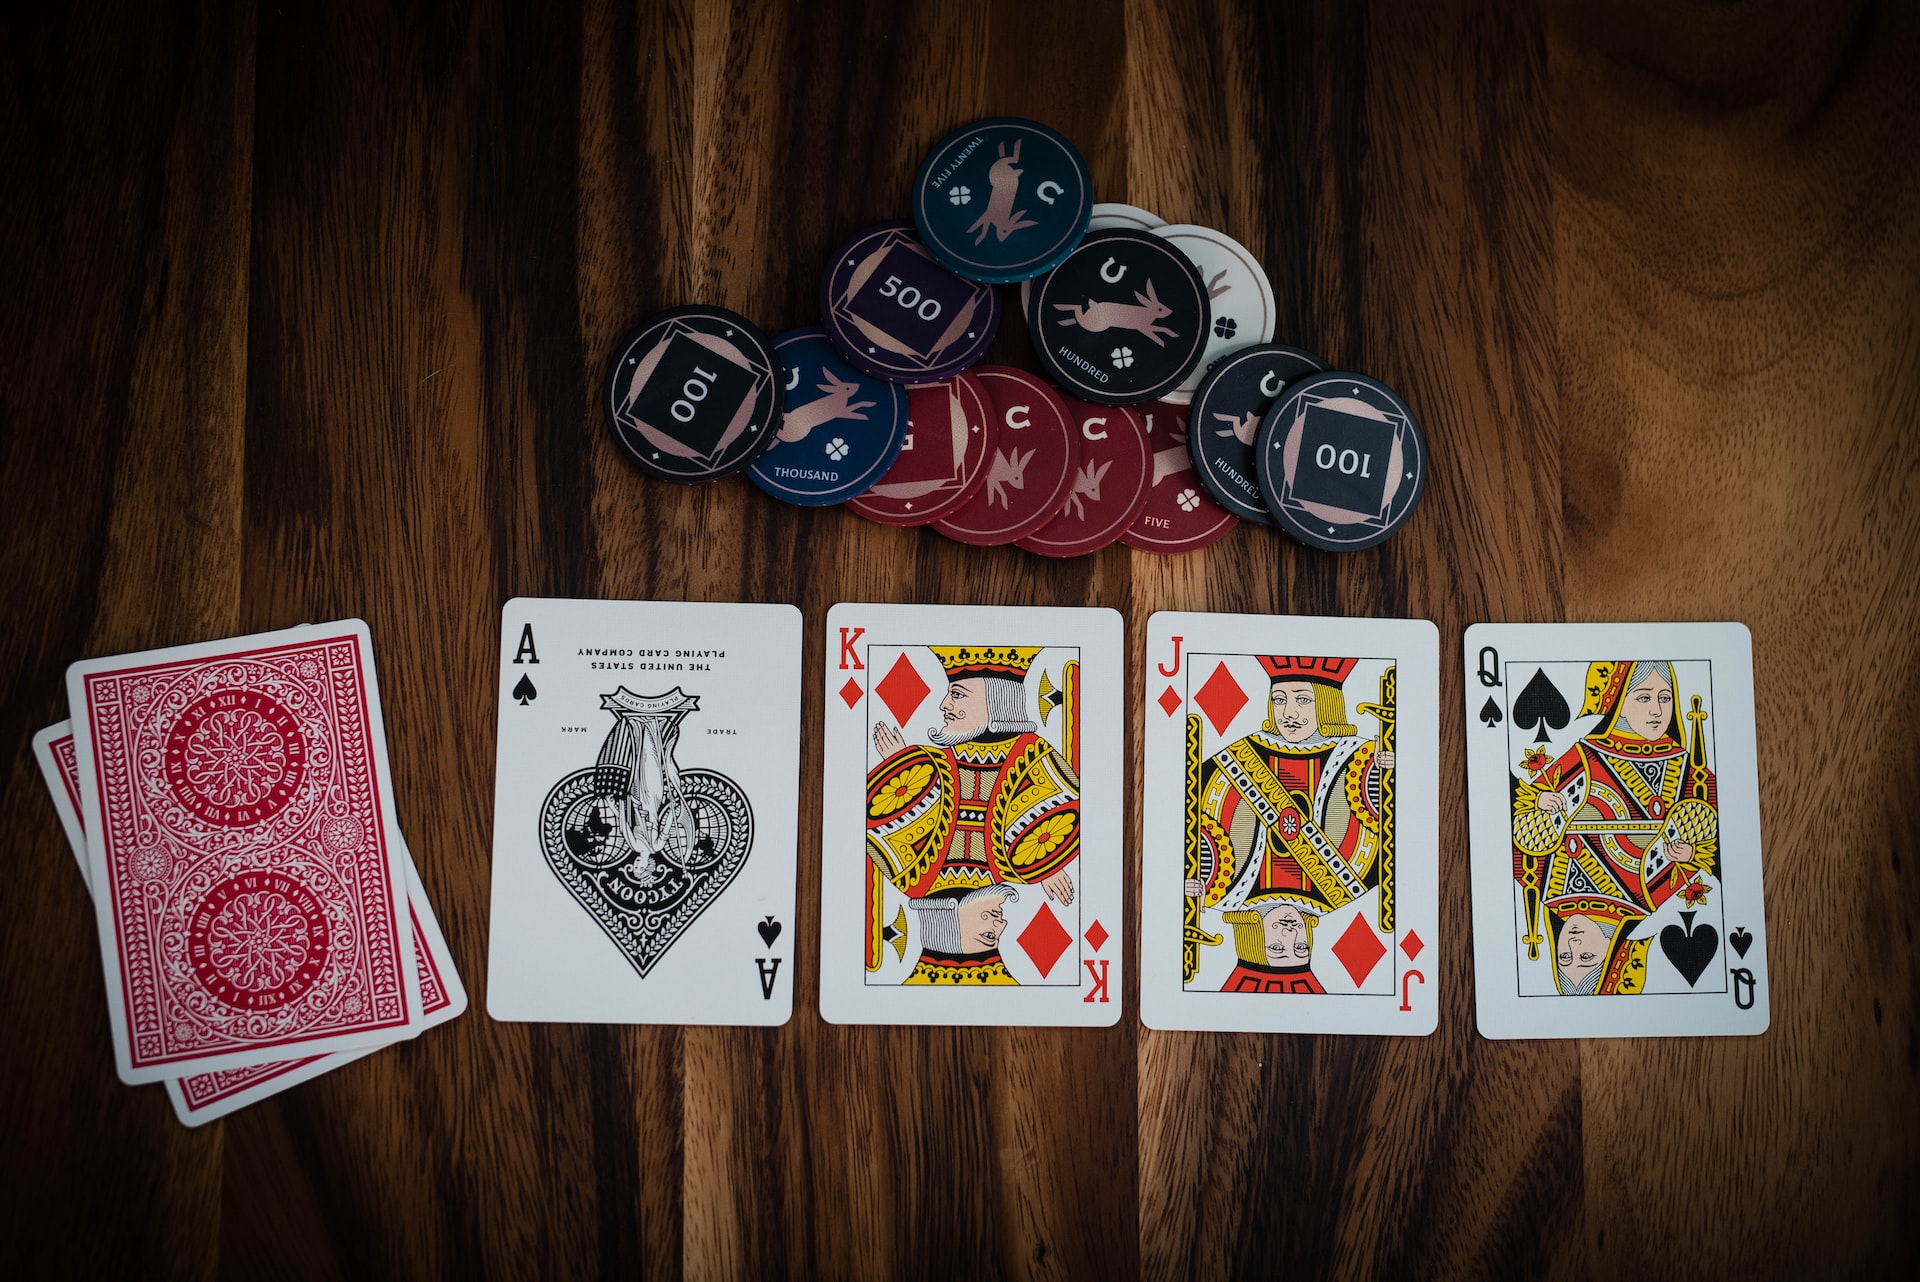 Four opened cards and two closed cards laying beside several casino chips